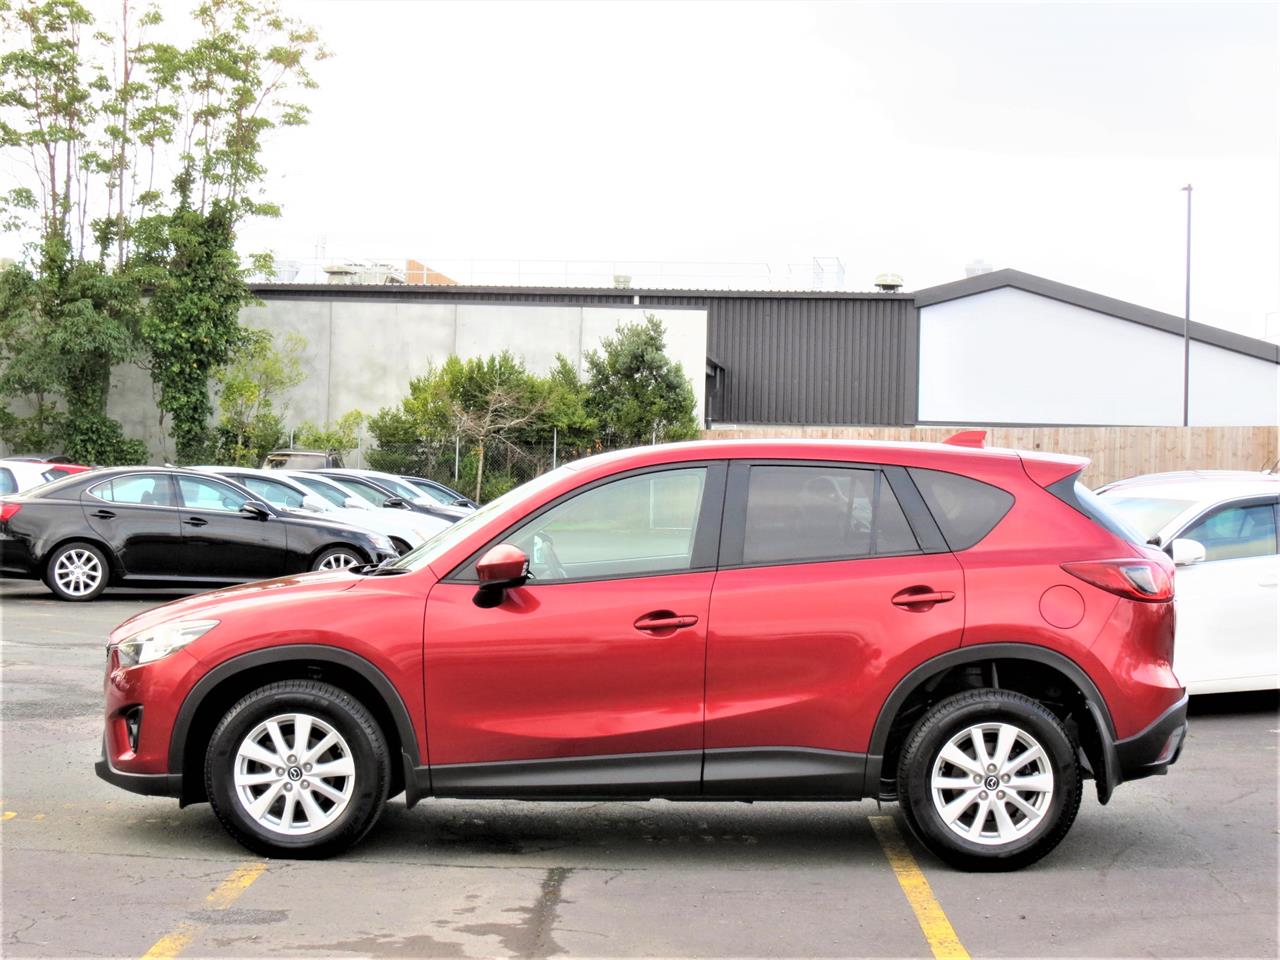 2012 Mazda CX-5 only $67 weekly